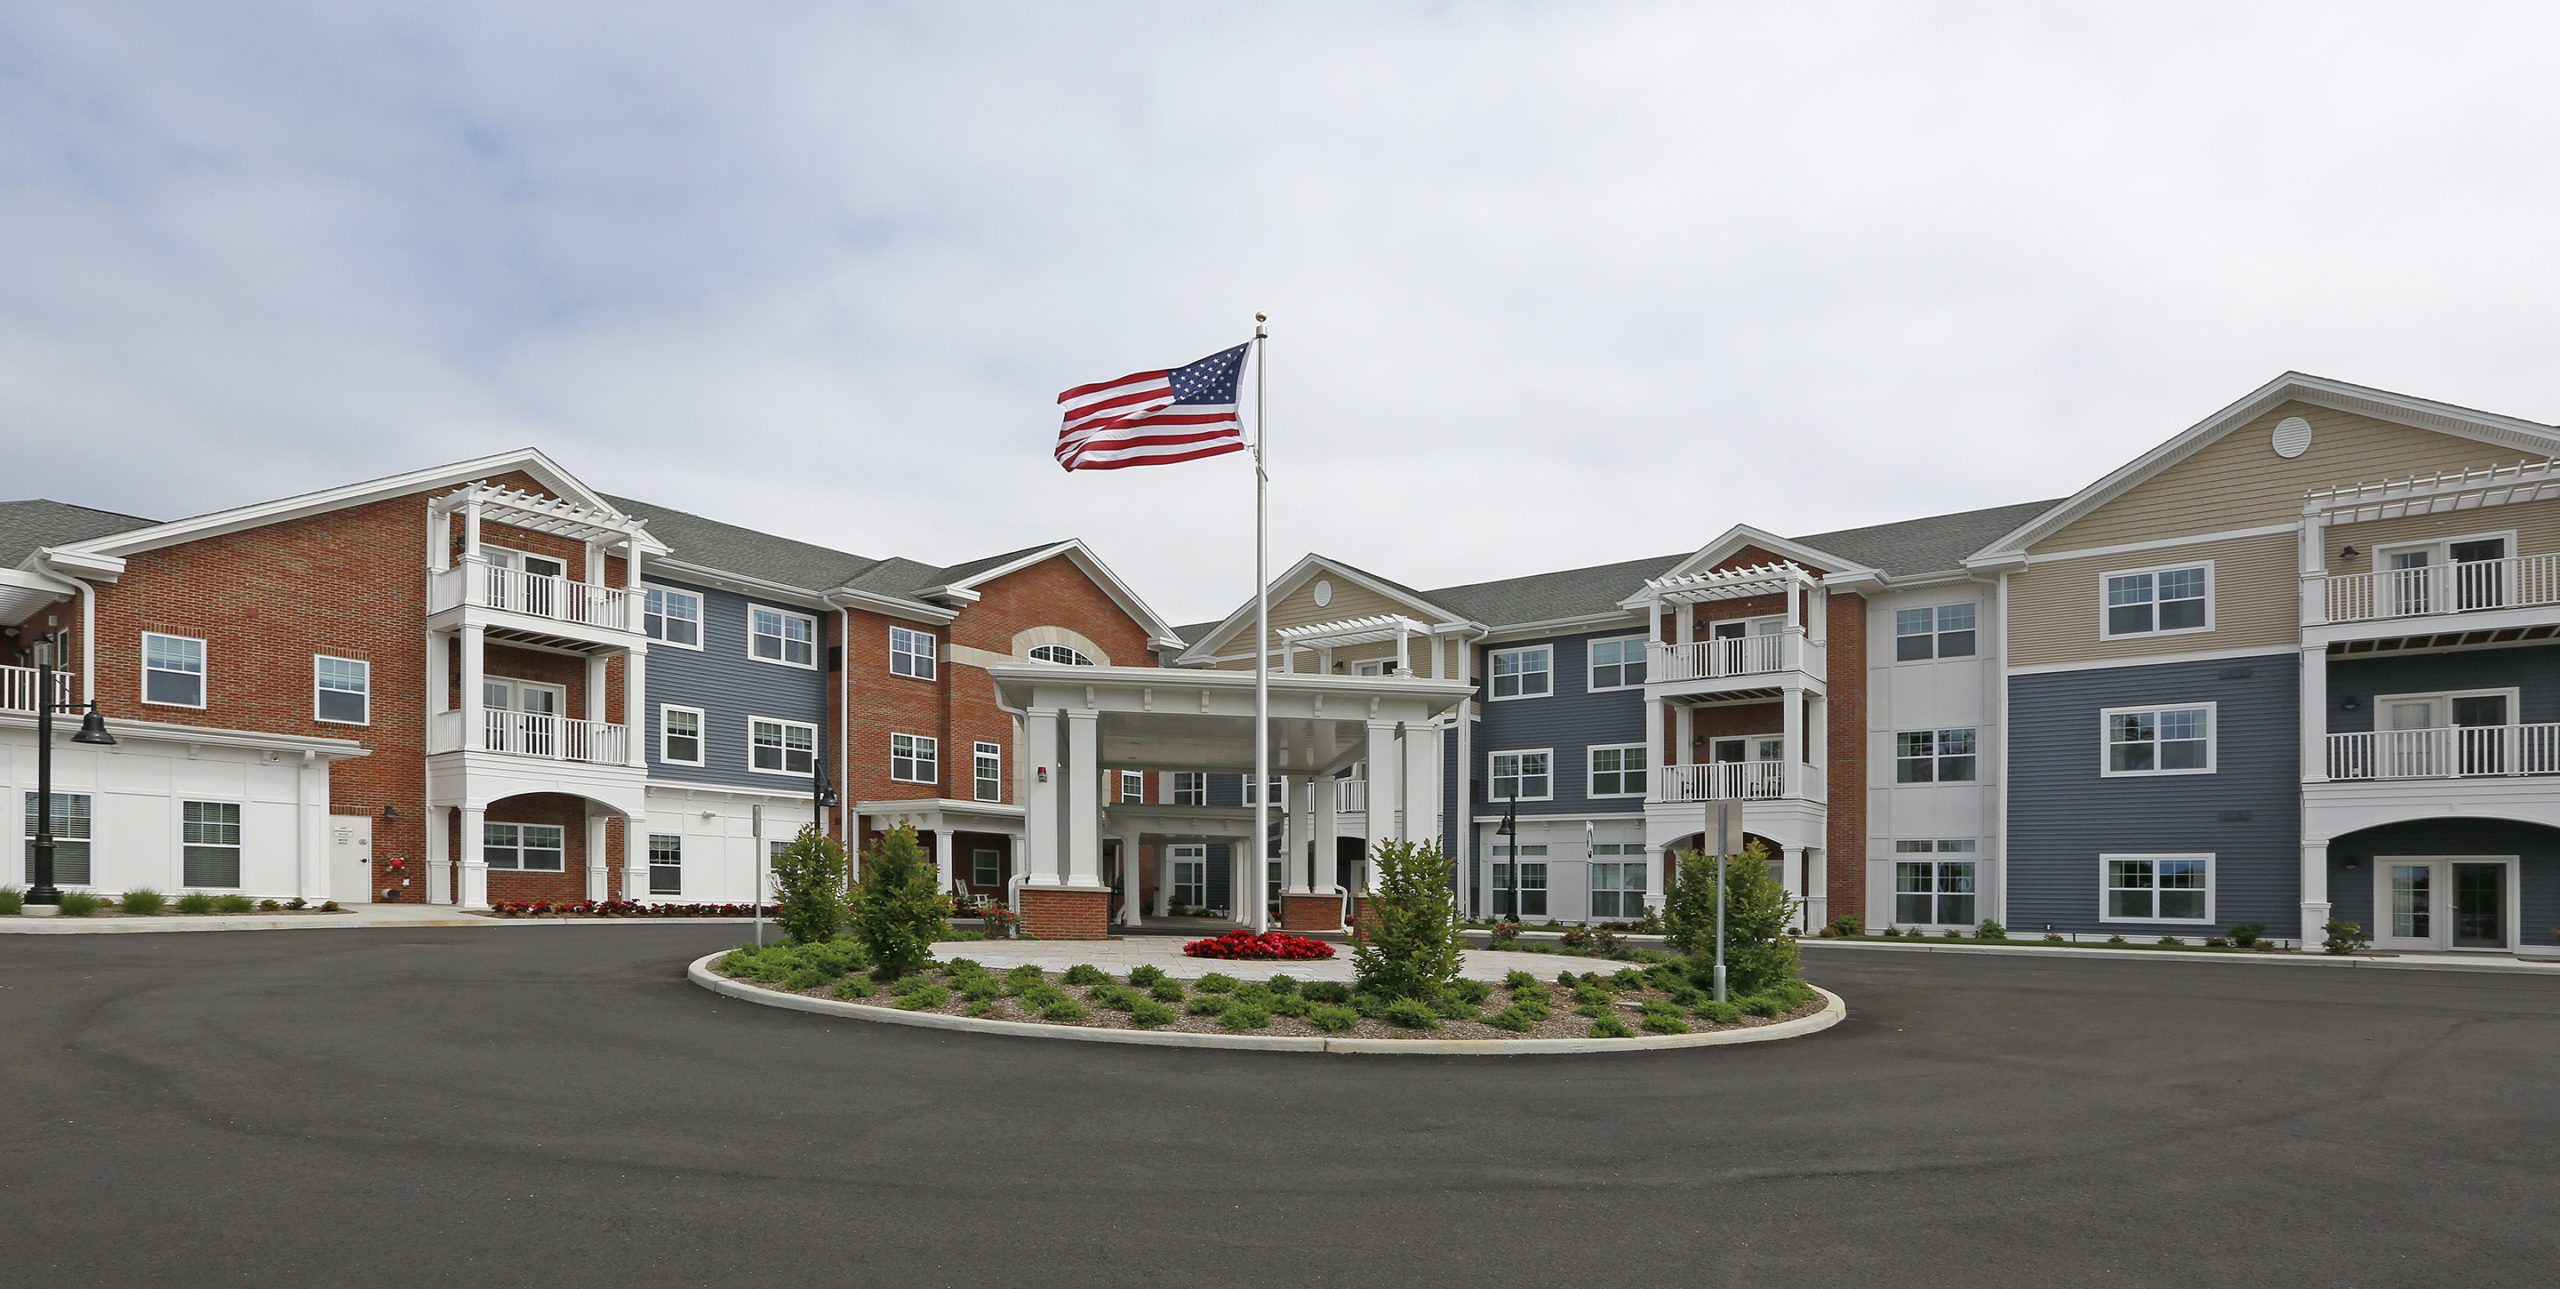 American flag waving high outside of Brightview Senior Living in Sayville, NY